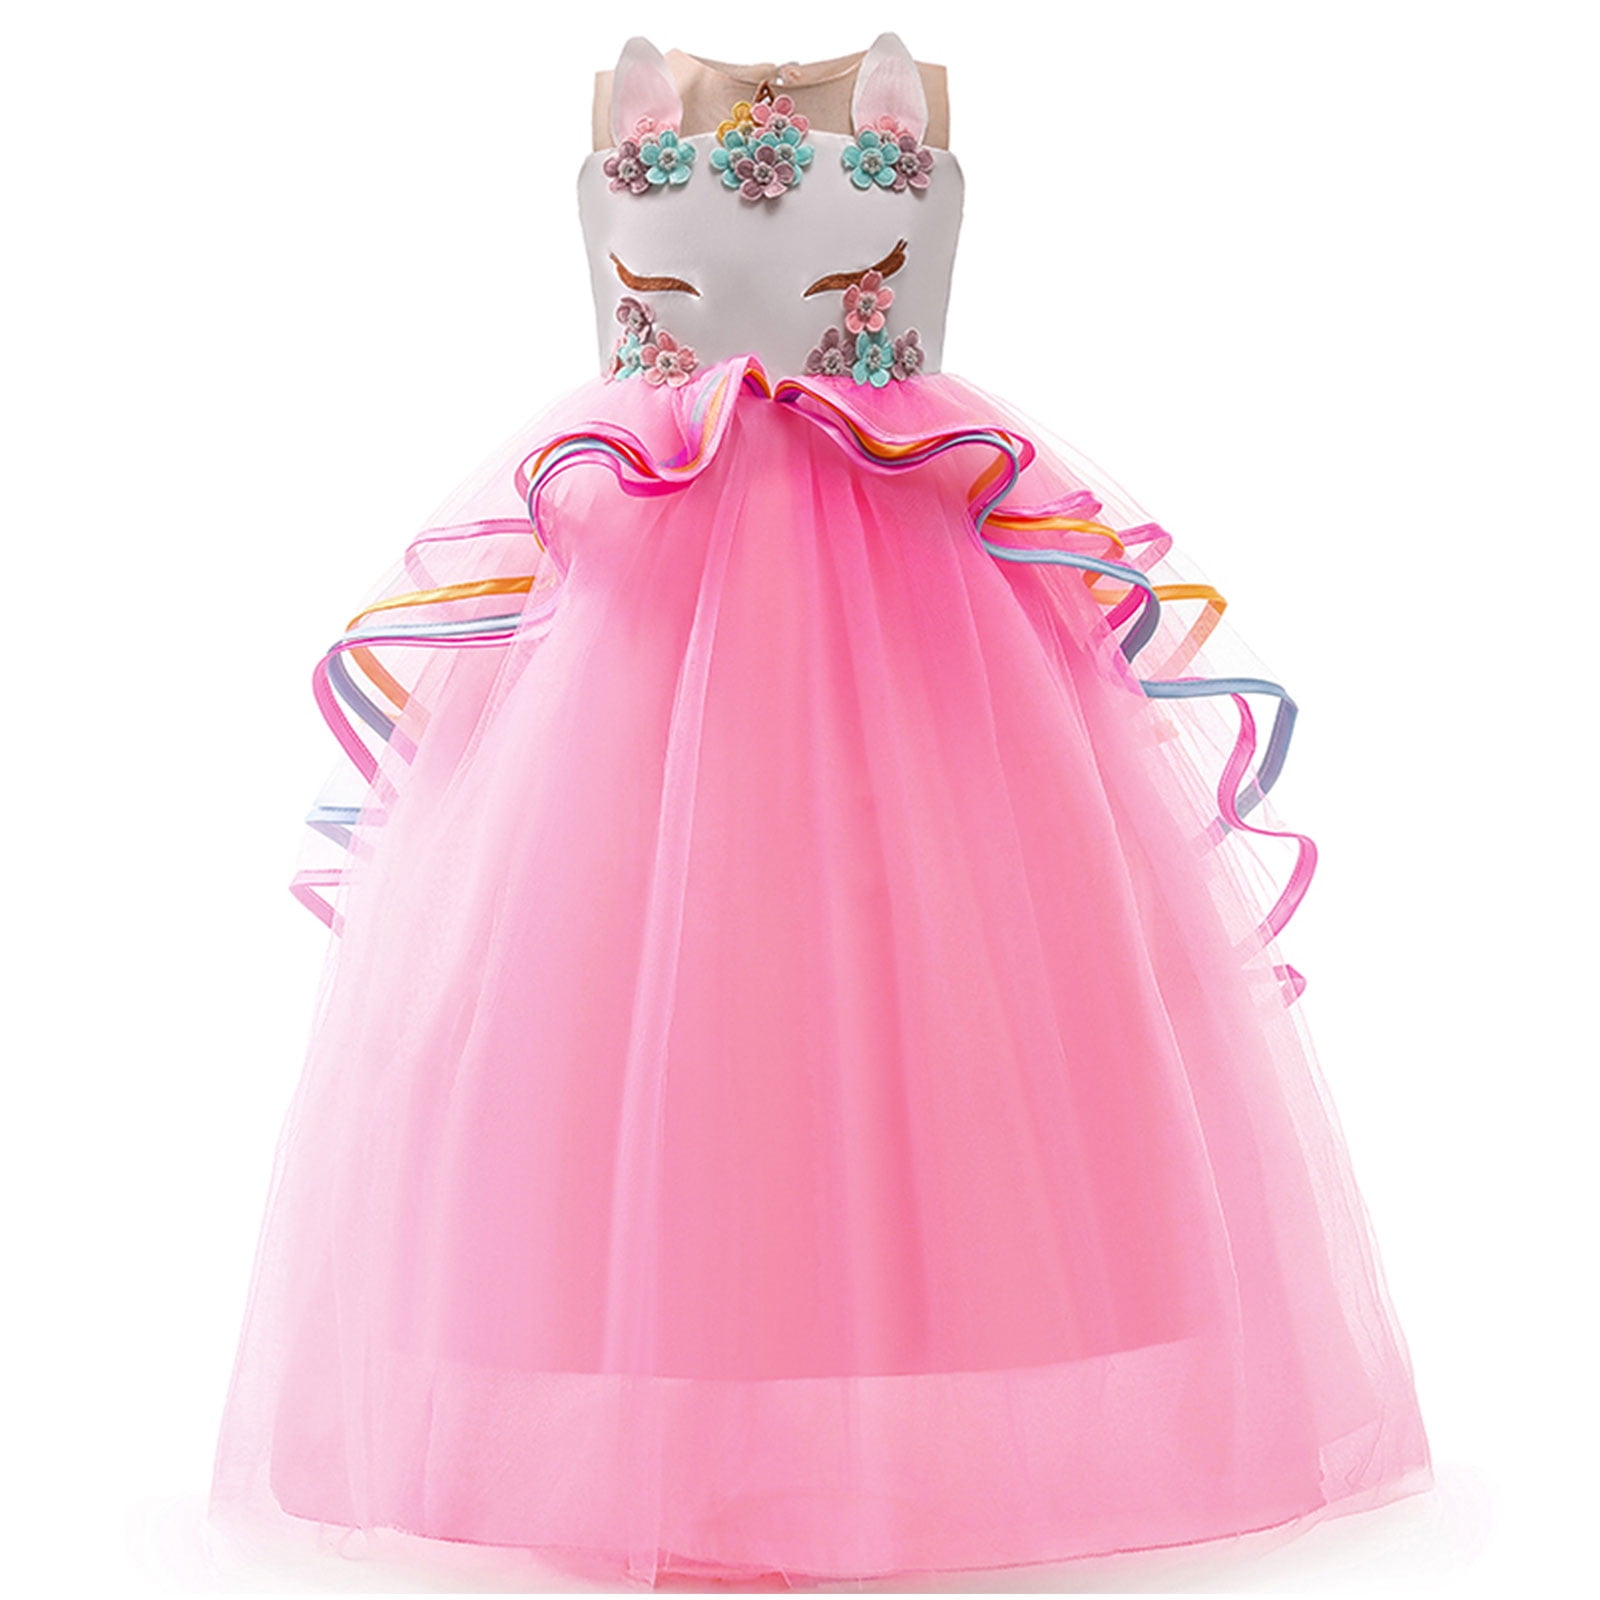 New Arrival Rainbow Tulle Party Dresses Ball Gown Handmade 3D